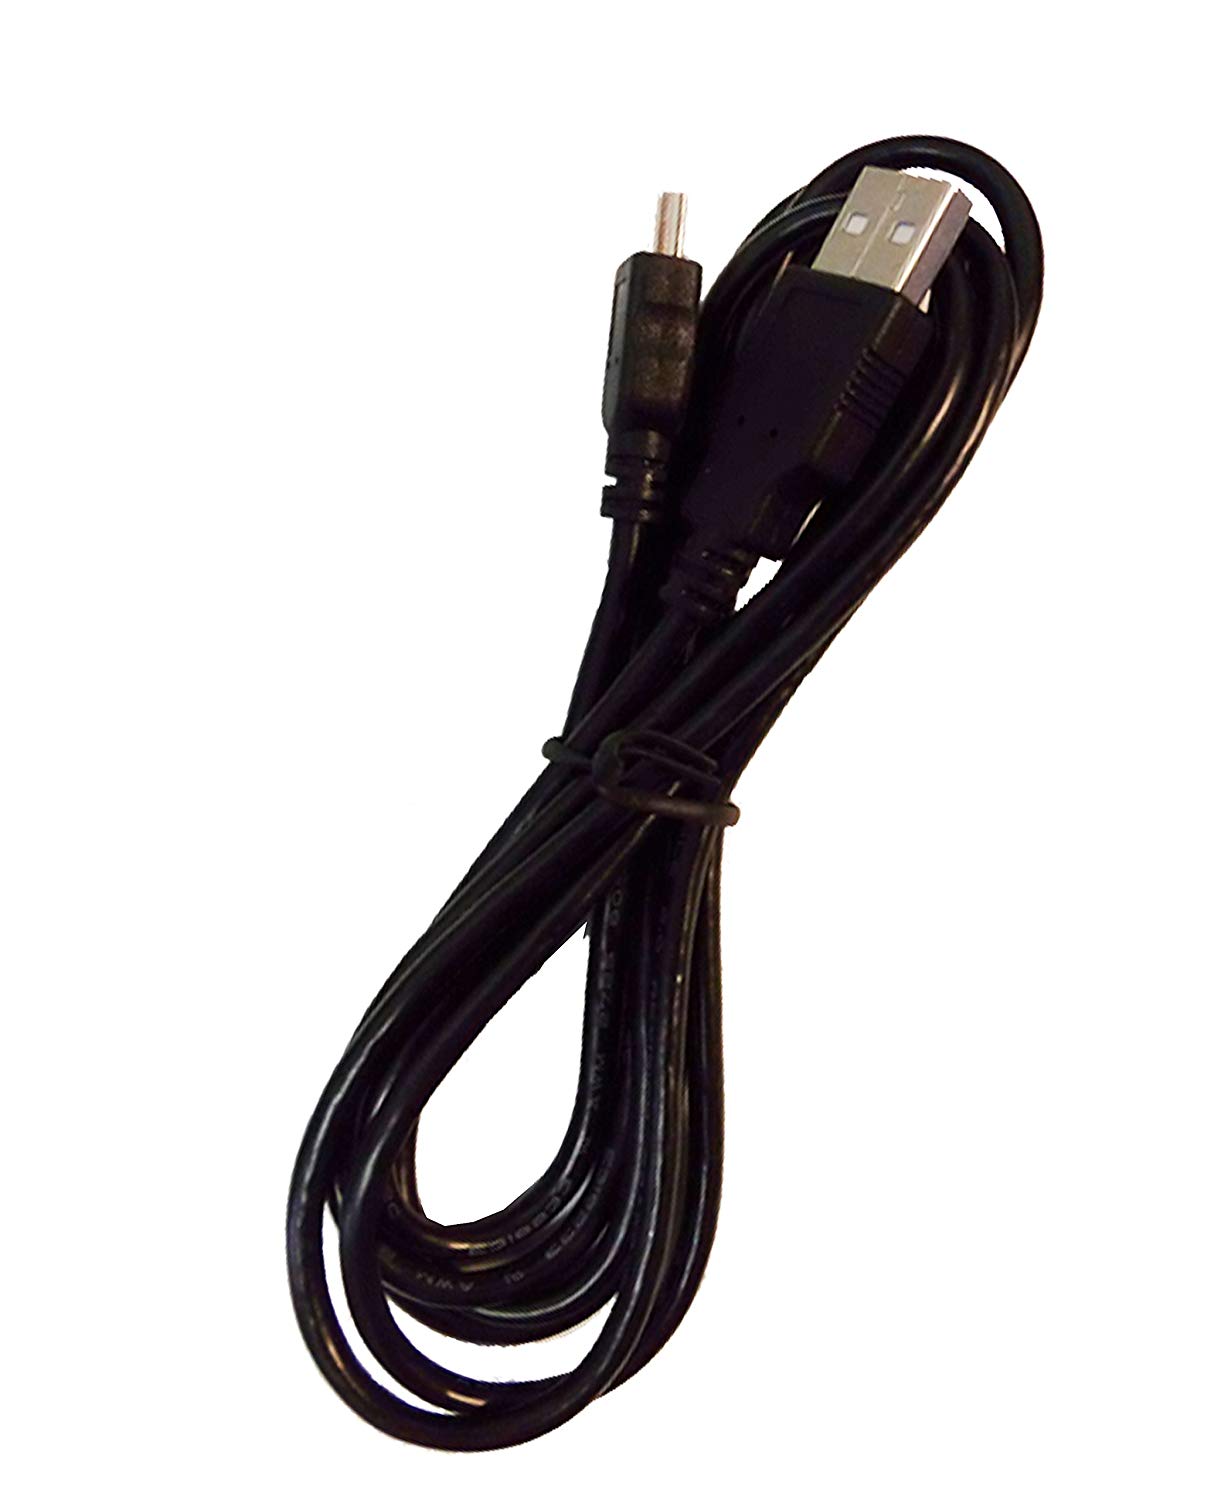 USB Cable for Canon Powershot ELPH 180 Digital Camera,and USB computer cord for Canon Powershot ELPH 180